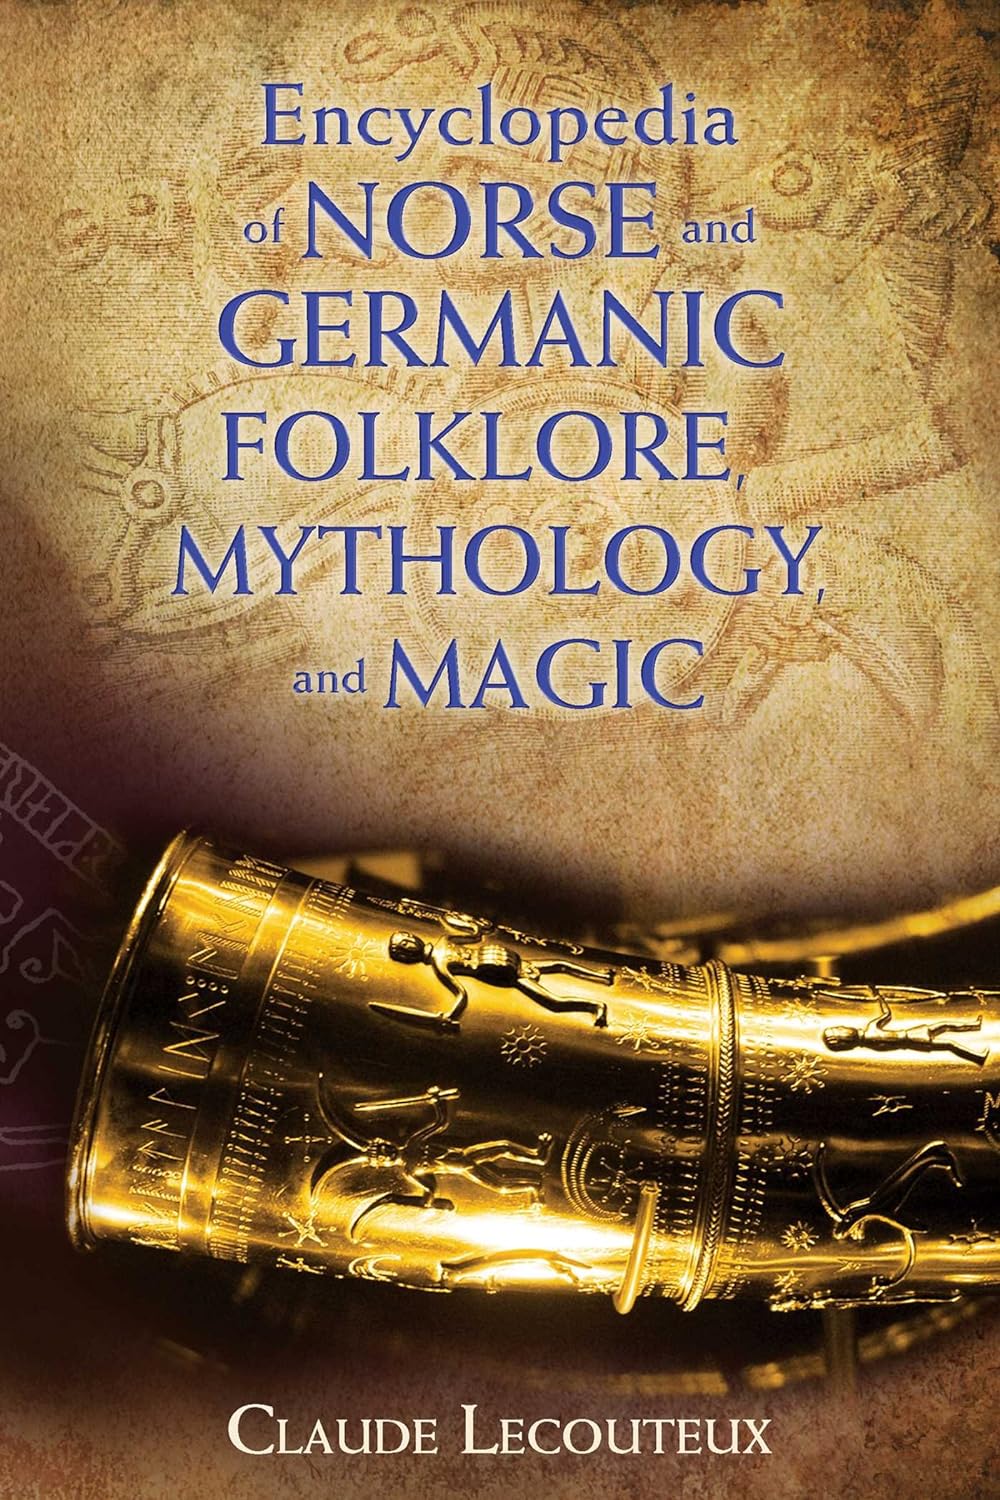 Claude Lecouteux: Encyclopedia of Norse and Germanic folklore, mythology, and magic (2016)